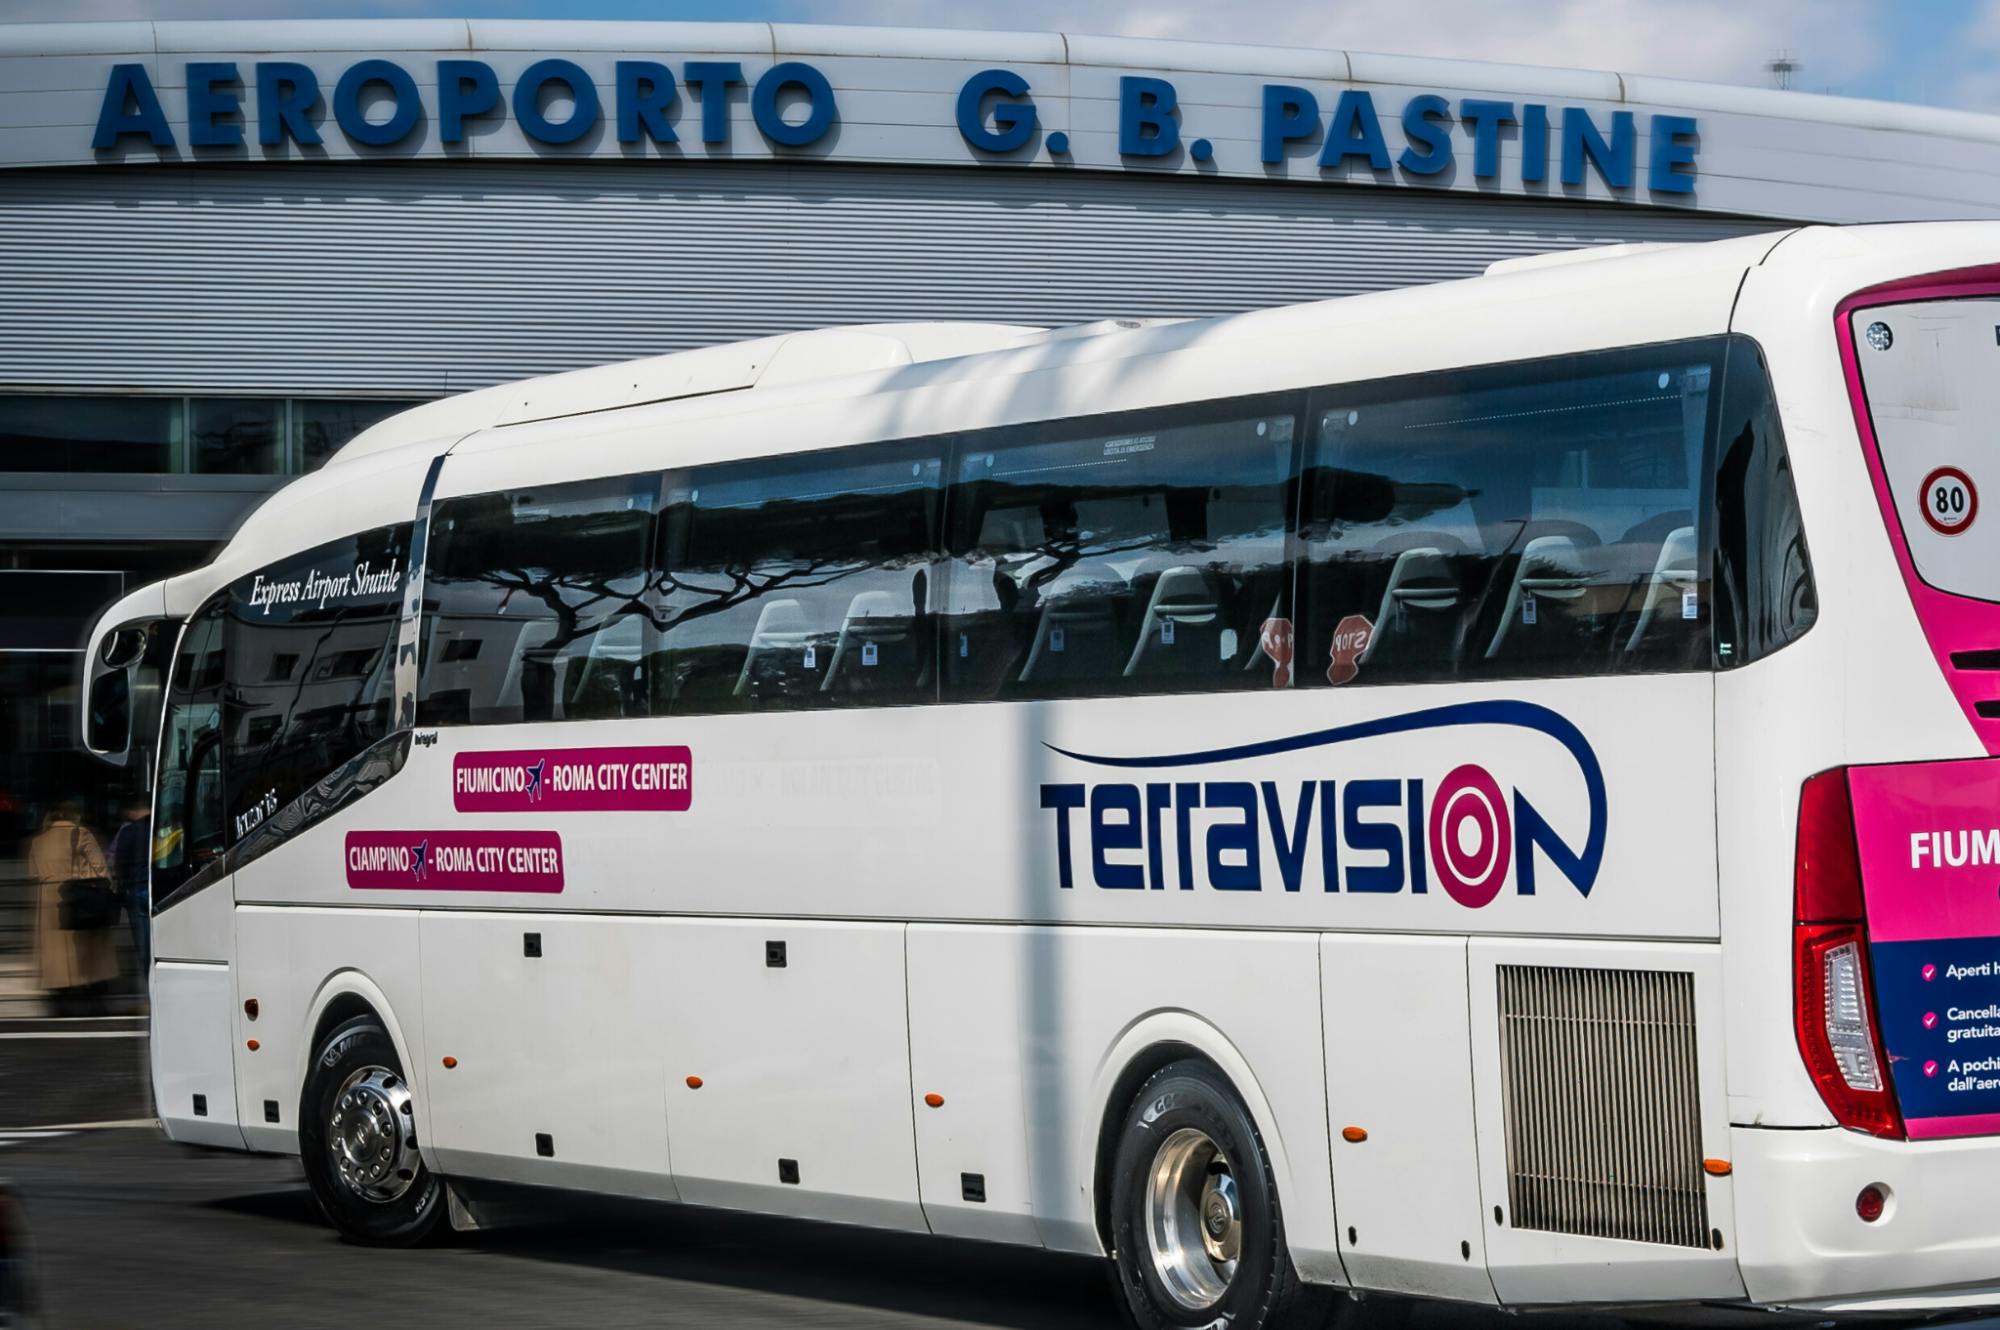 Bus transfer between Ciampino airport and Rome city center. Musement